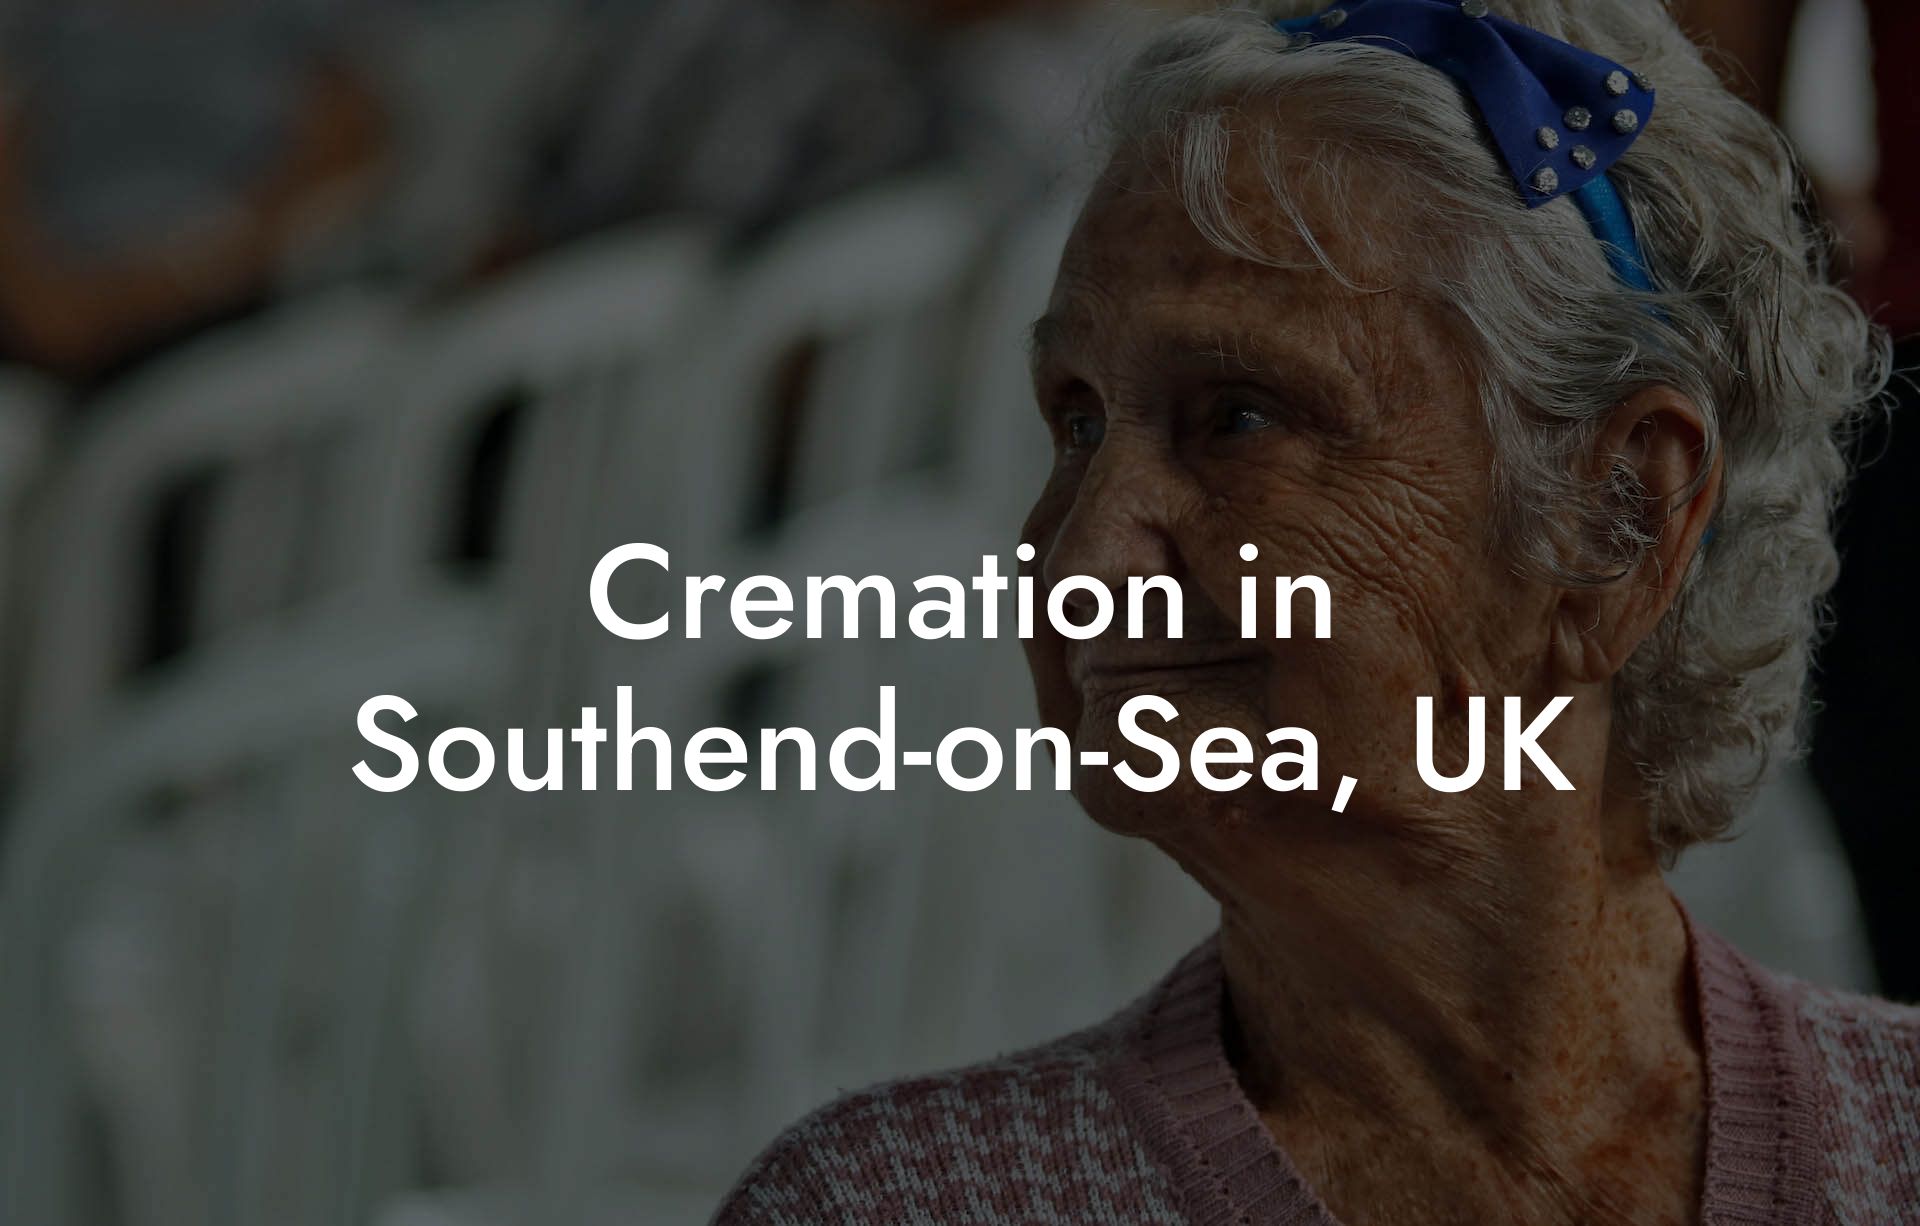 Cremation in Southend-on-Sea, UK